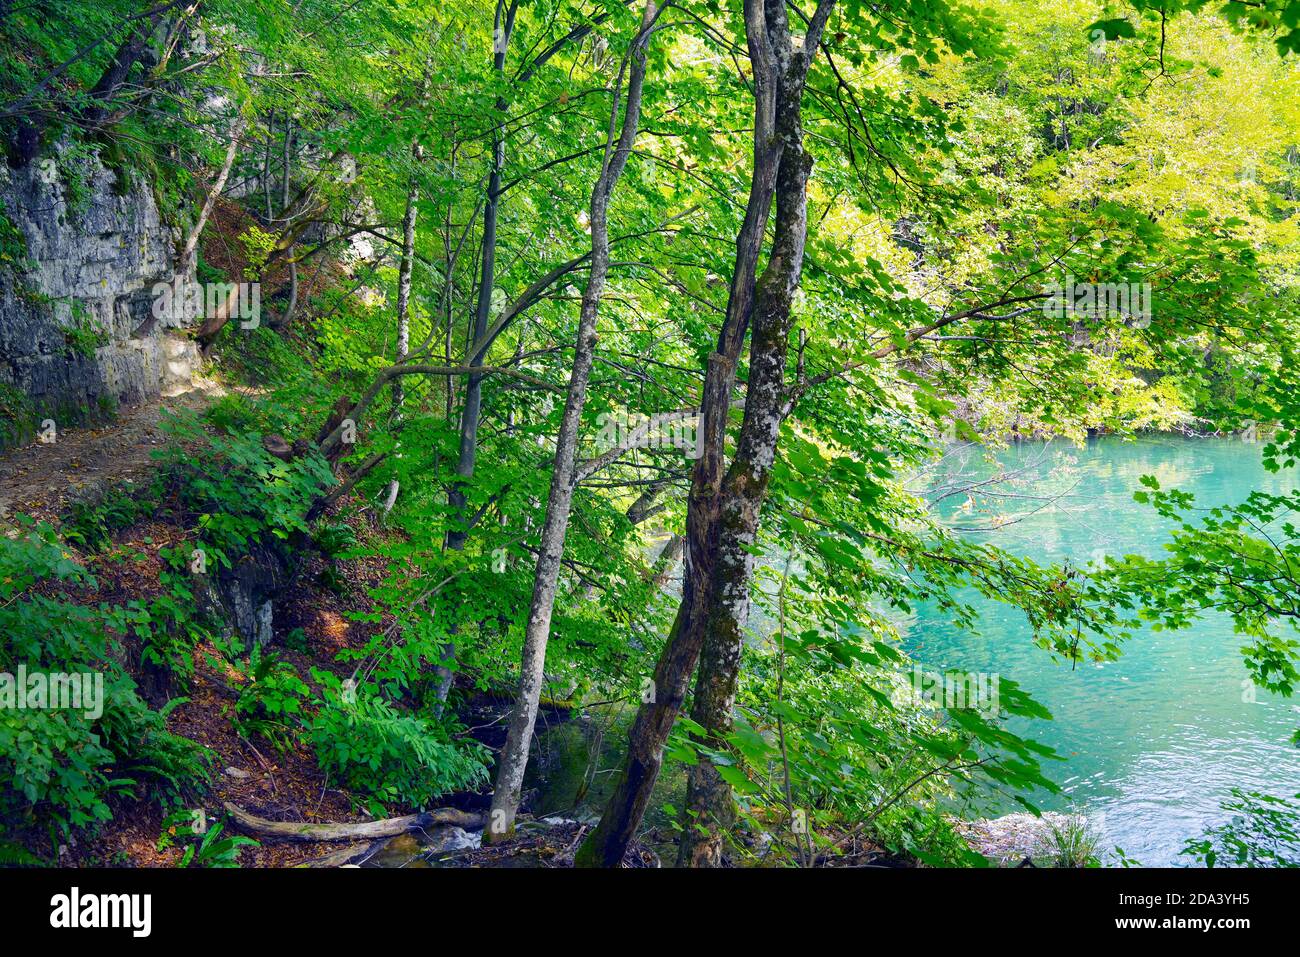 Abstract natural details in Plitvice National Park, Croatia, Europe Stock Photo